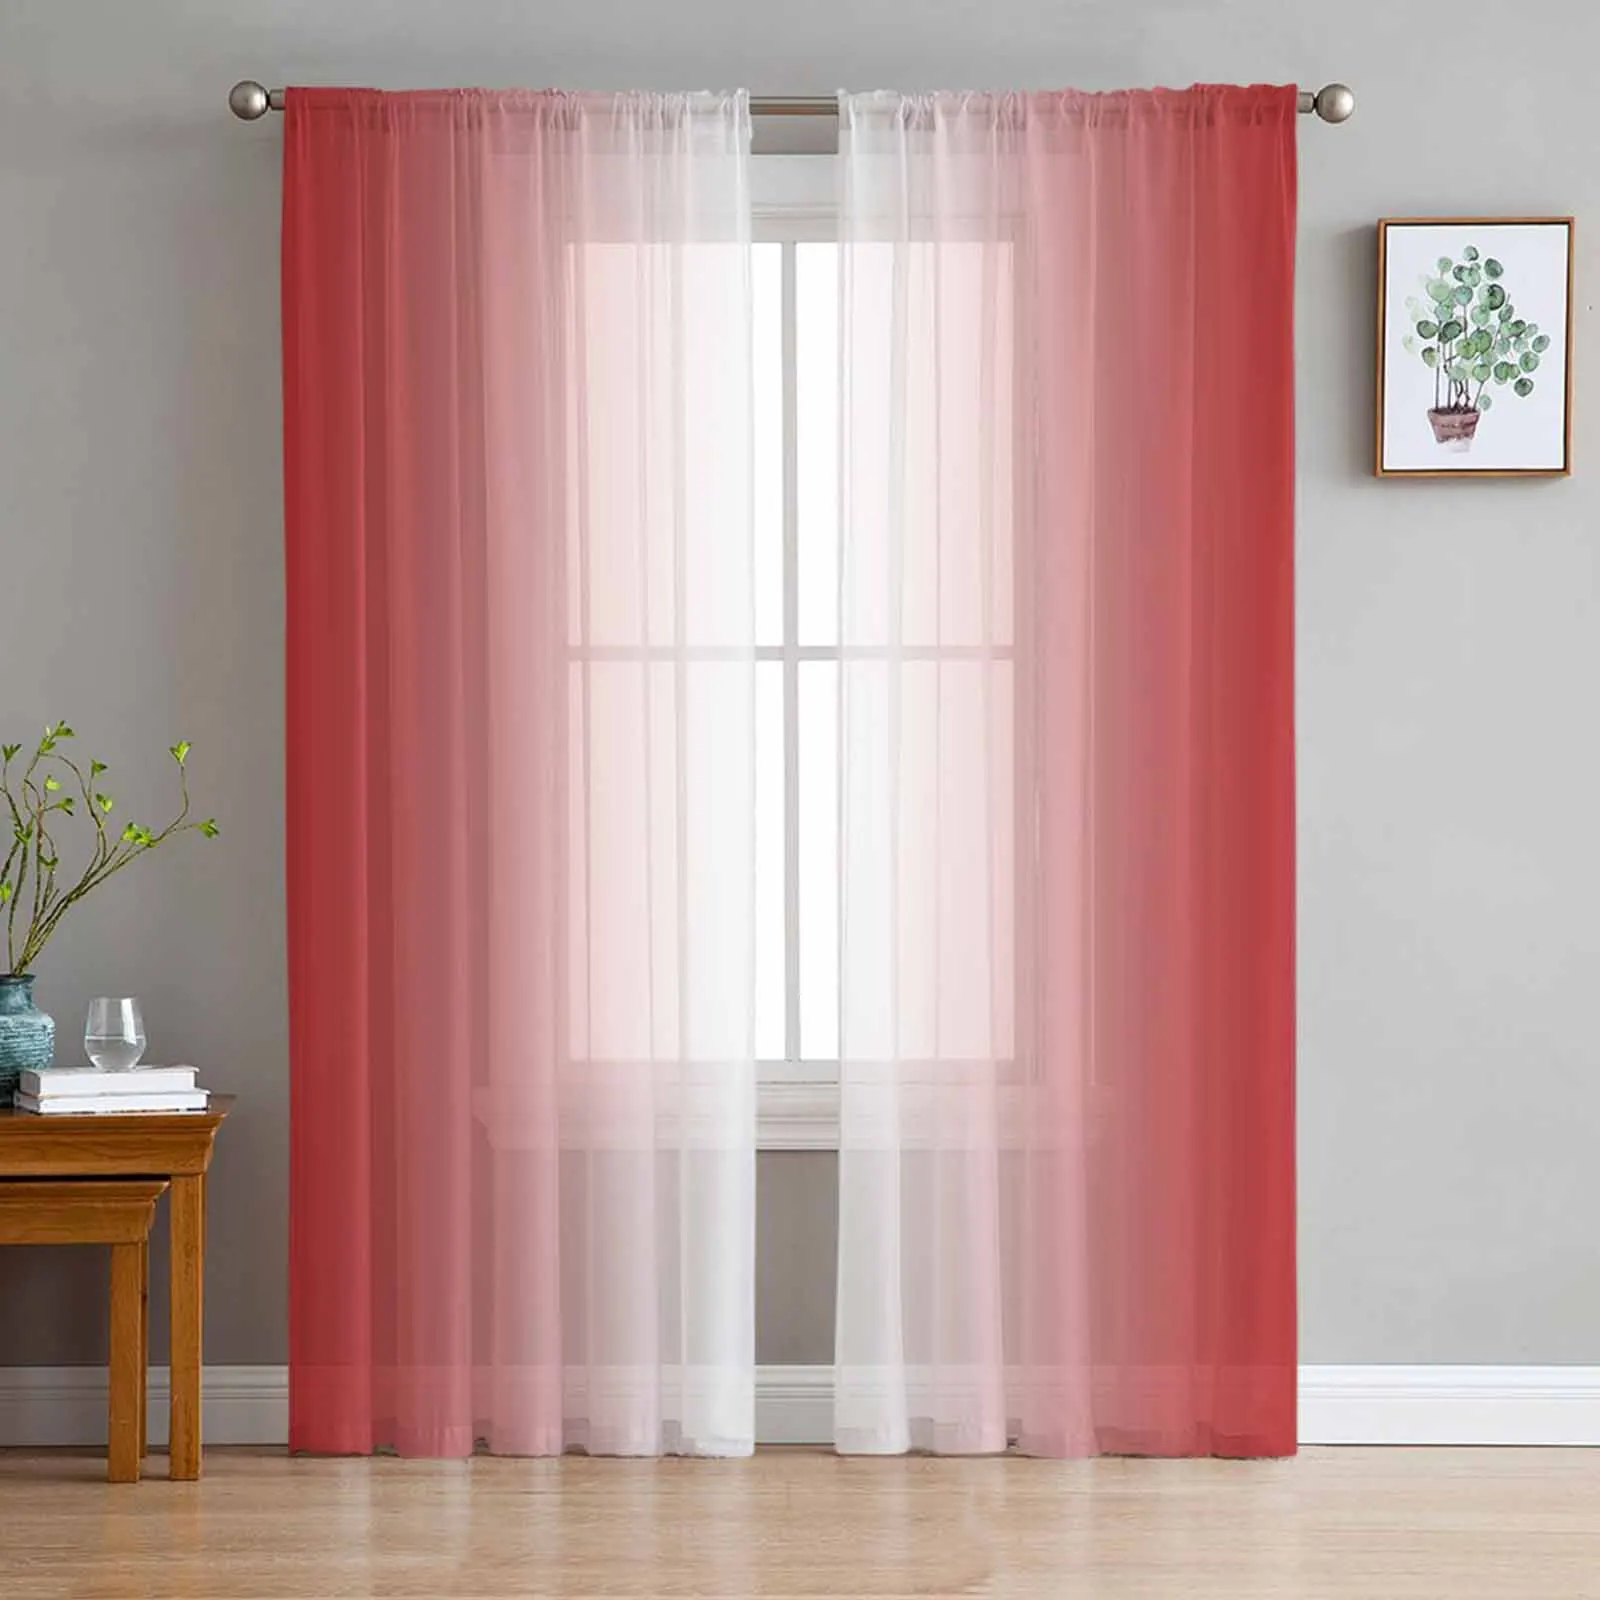 

Red And White Gradient Tulle Sheer Curtain Living Room Adults Bedroom Drapes Kitchen Voile Organza Decor Curtains